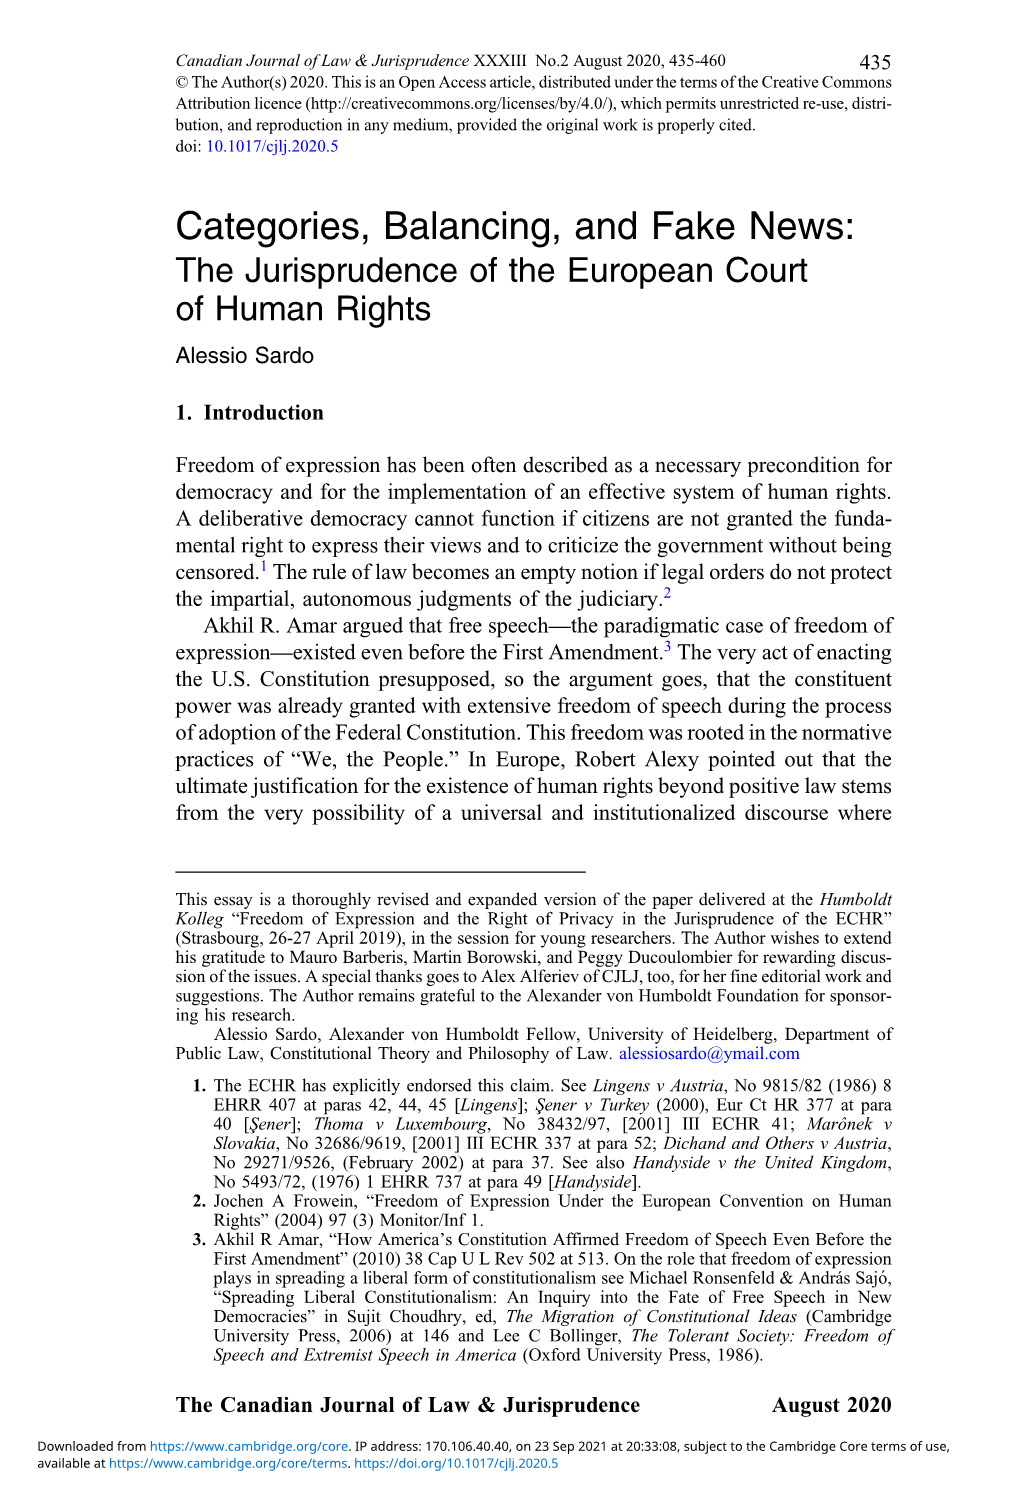 Categories, Balancing, and Fake News: the Jurisprudence of the European Court of Human Rights Alessio Sardo